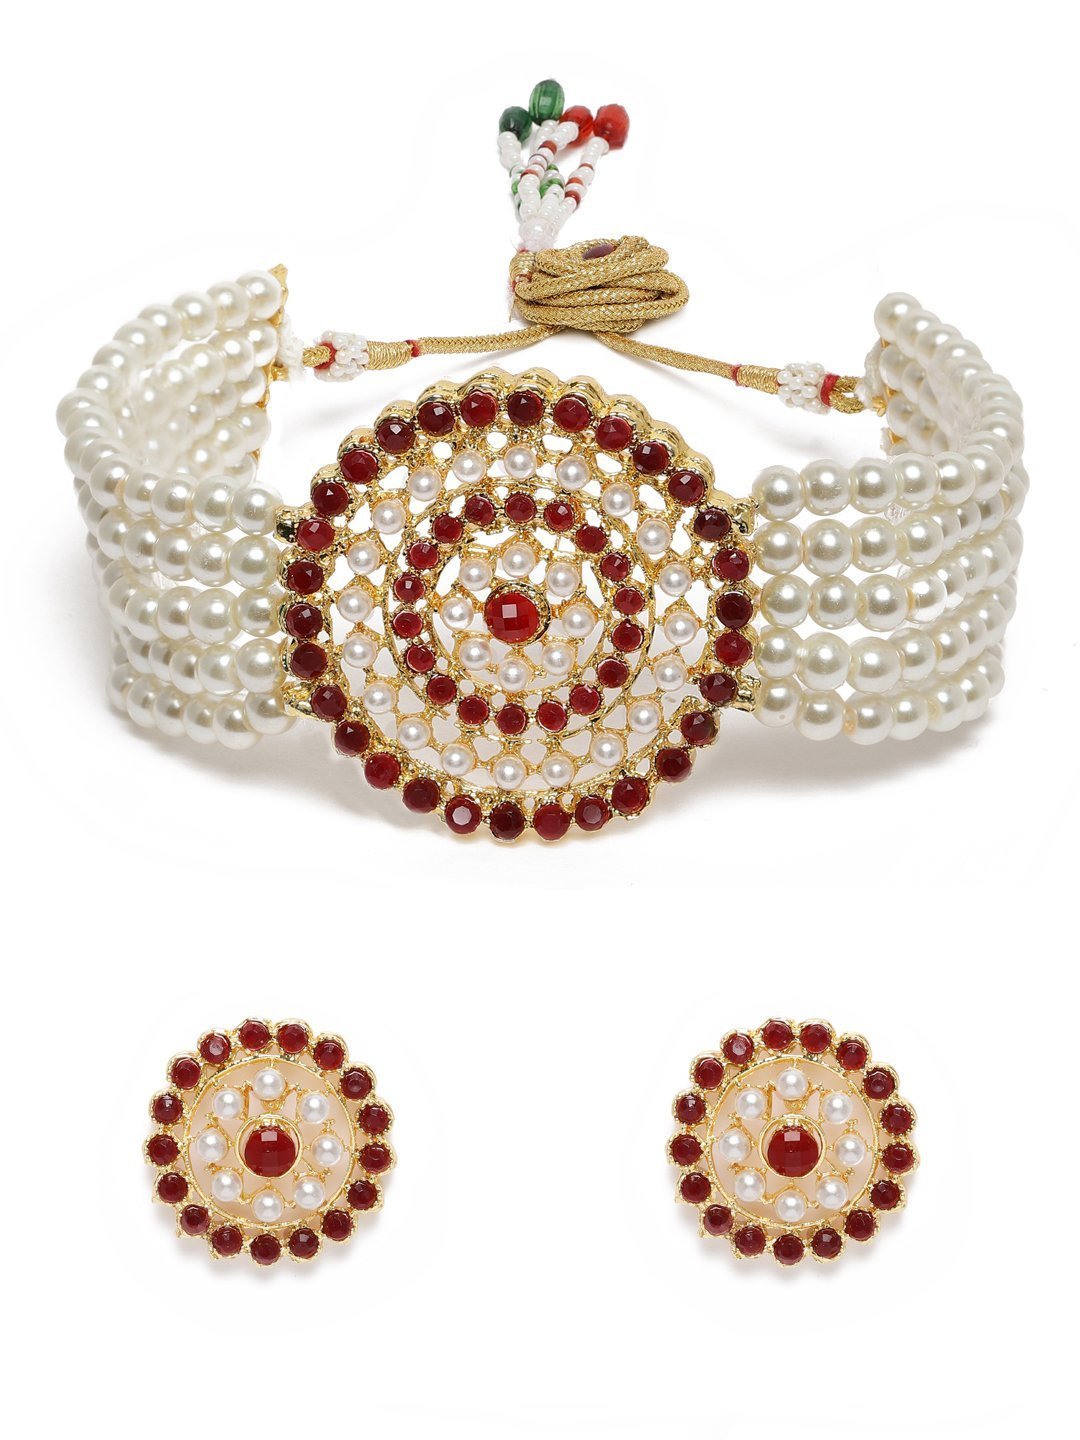 Women's Gold Plated Maroon Light Weight Pearl Beaded Choker Necklace Set - i jewels